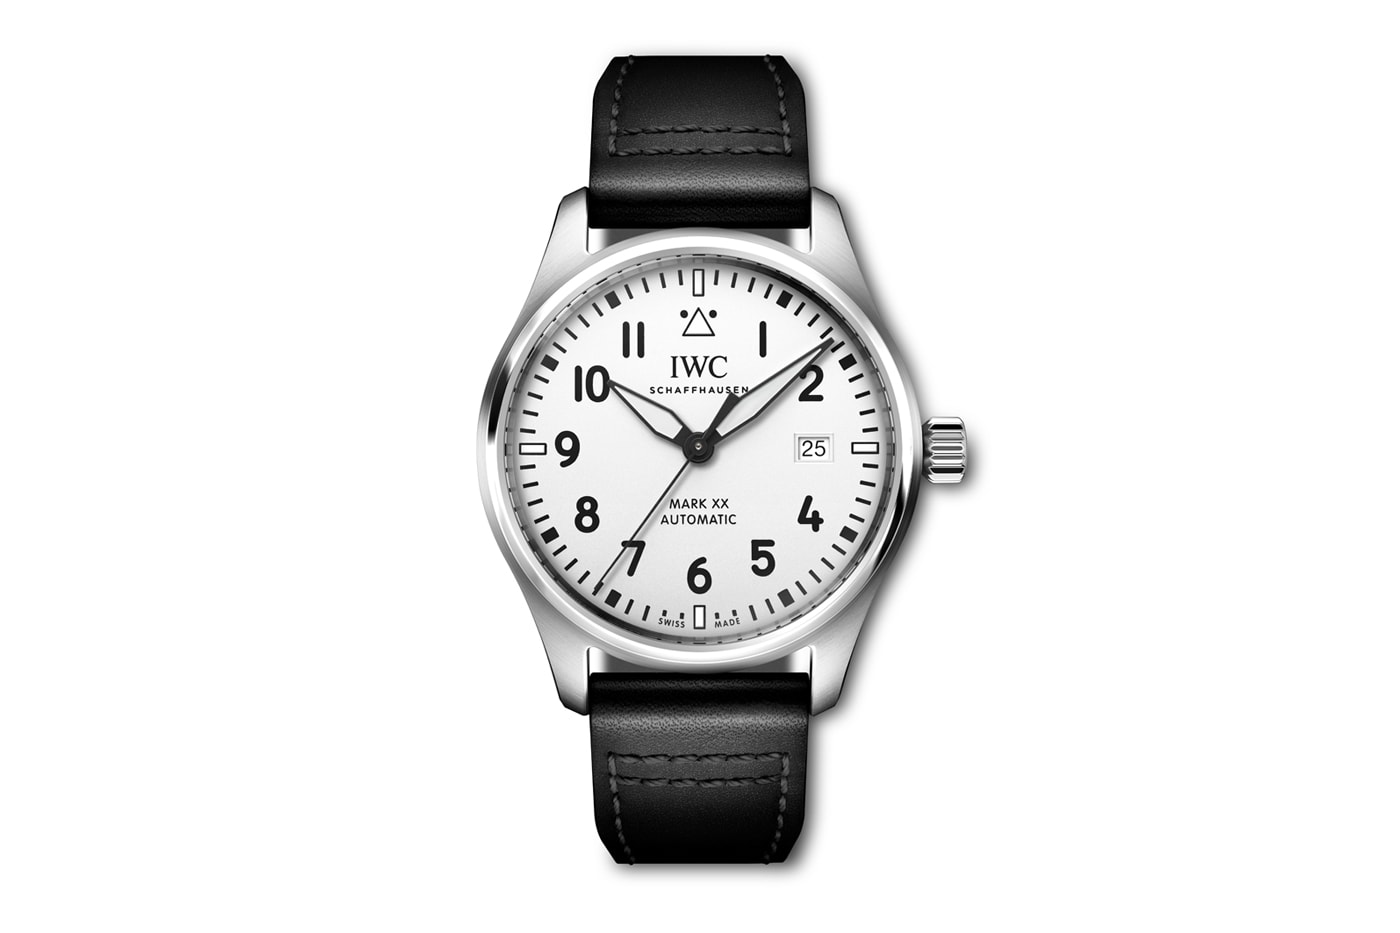 IWC Pilot's Watch Mark XX Silver-Plated Dial Release Info